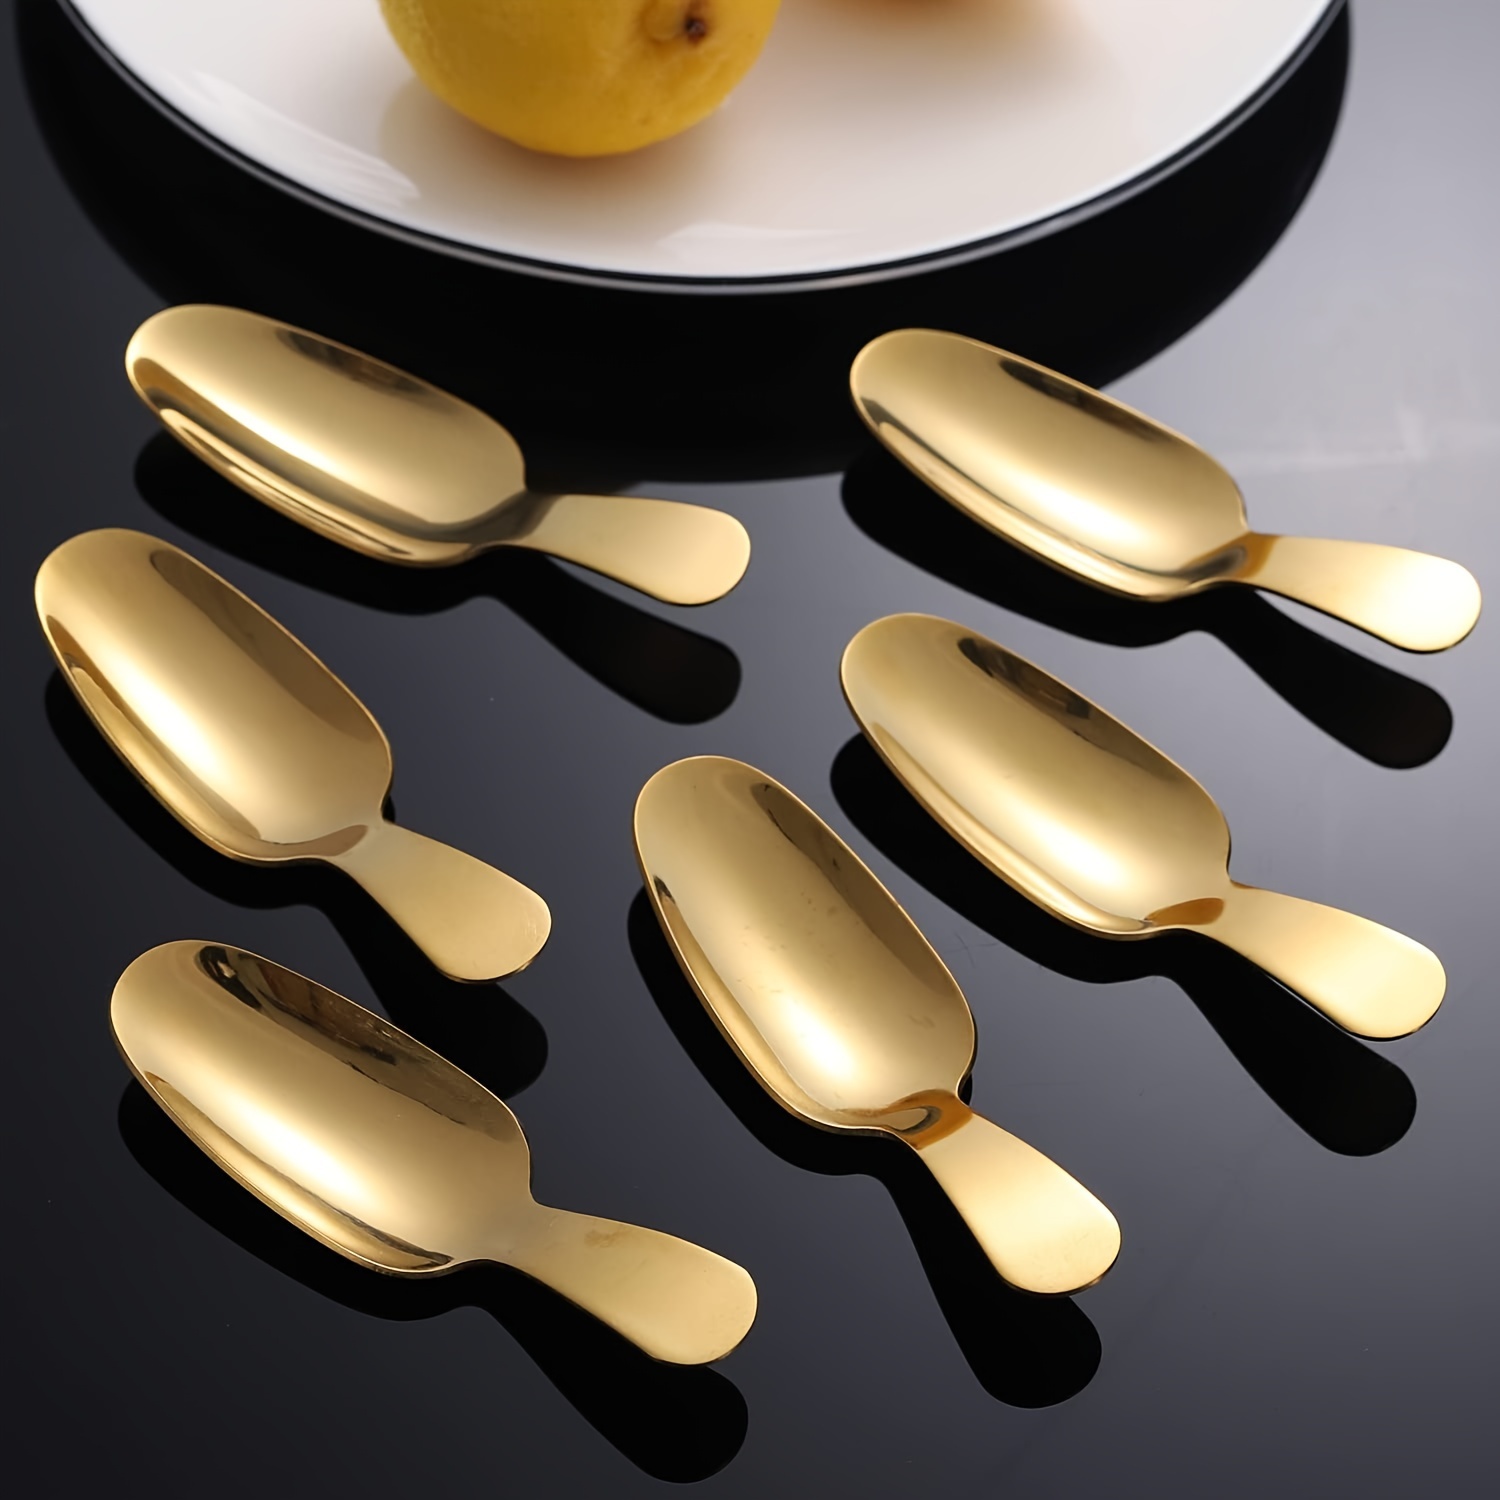 Short Handle Spoons, Small Scoops for Canisters, Mini Gold Spoons, Spice  Jars Spoon for Salt Sugar Condiments Coffee Tea Dessert, 1pc 